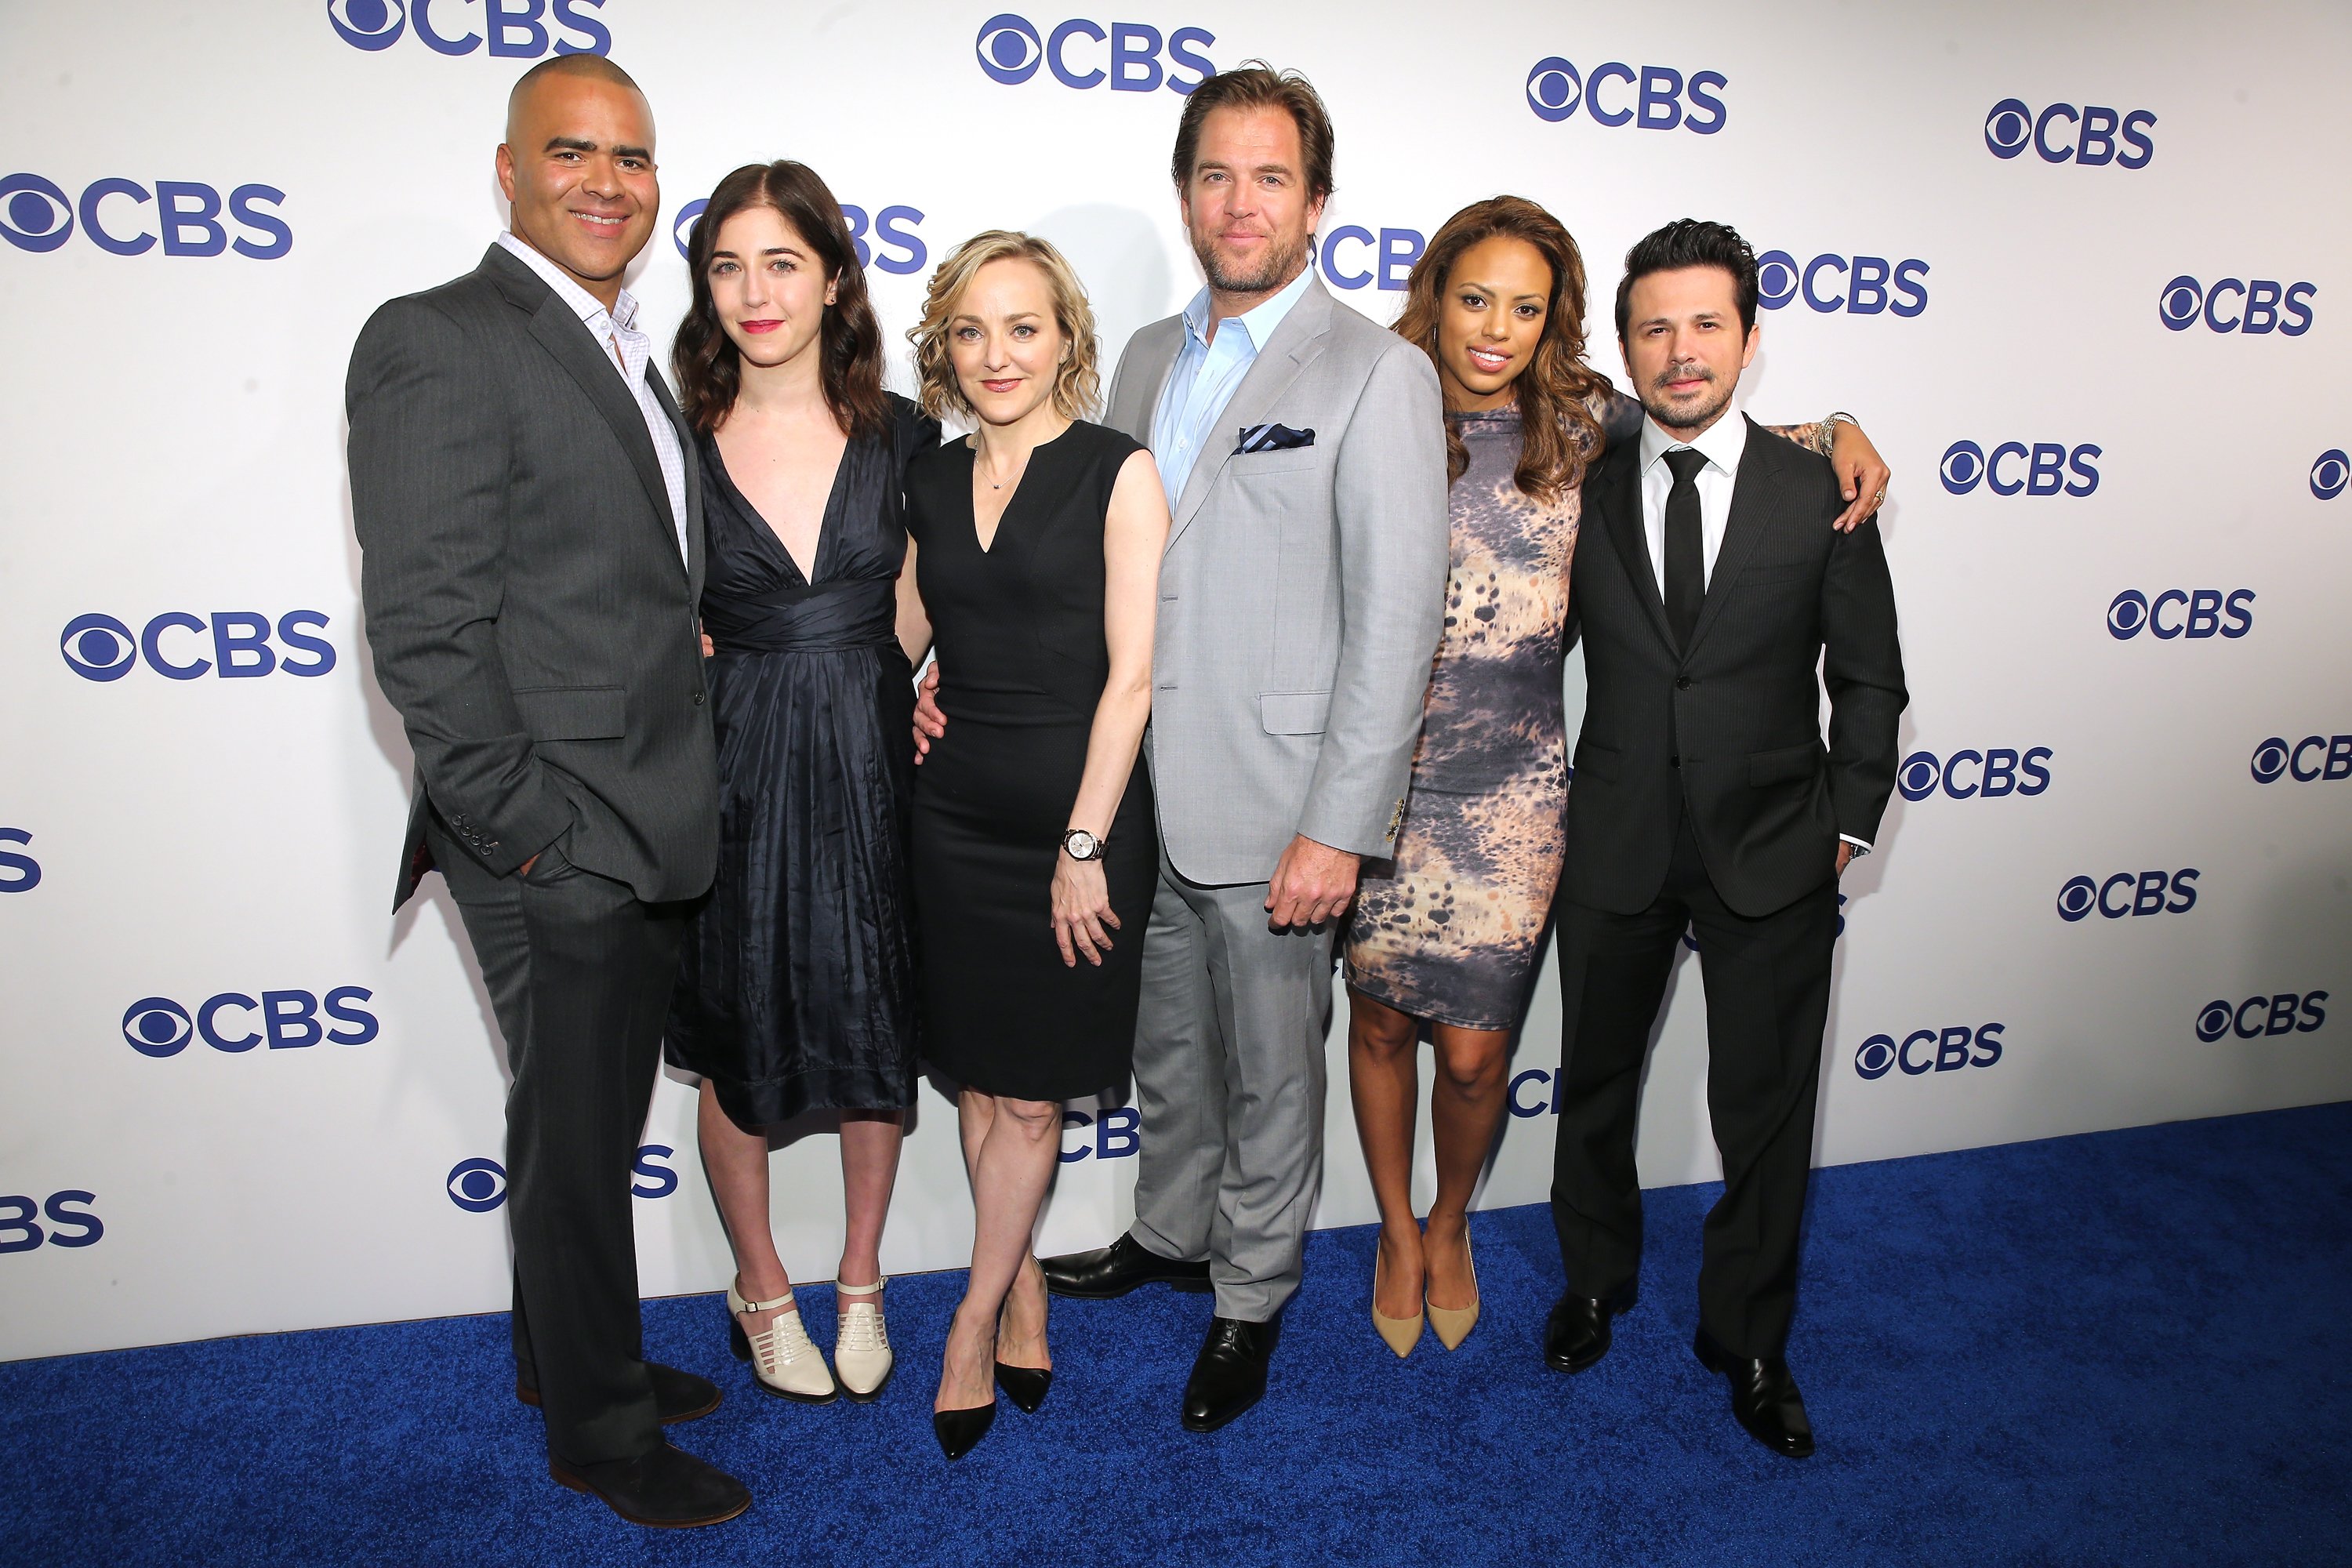 Cast of Bull: Chris Jackson, Annabelle Attanasio, Geneva Carr, Michael Weatherly, Jamie Lee Kirchner, and Freddy Rodriguez attend the 2016 CBS Upfront at The Plaza on May 18, 2016, in New York City. | Source: Getty Images.